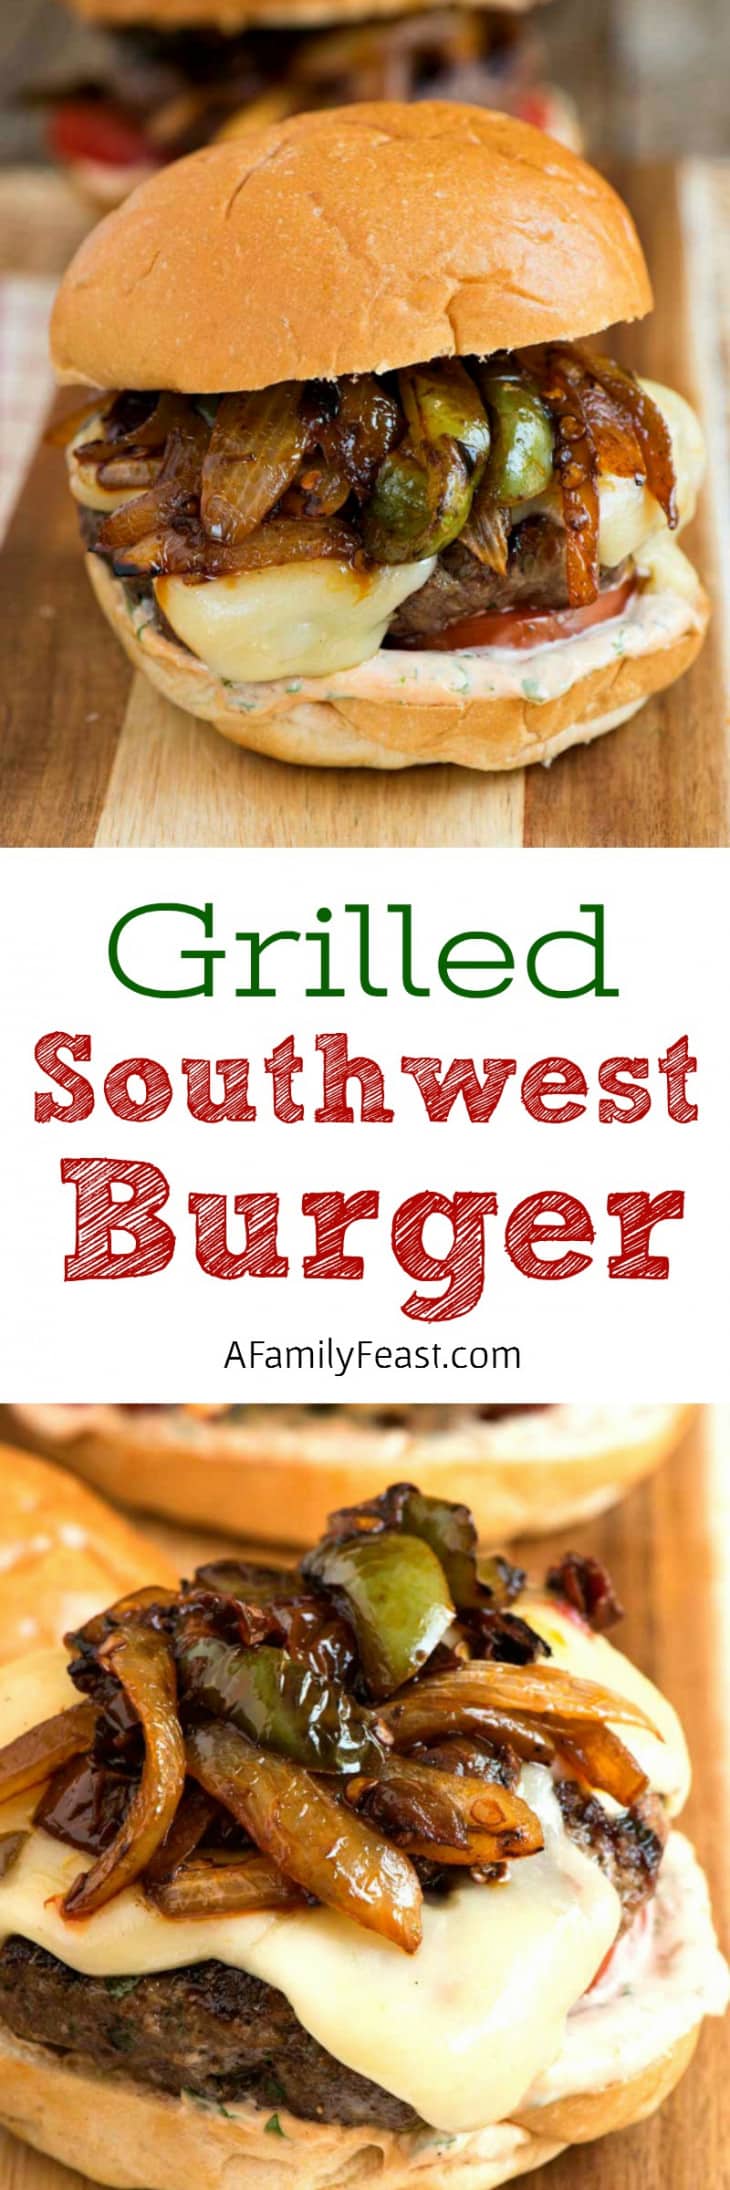 Grilled Southwest Burger - A Family Feast®